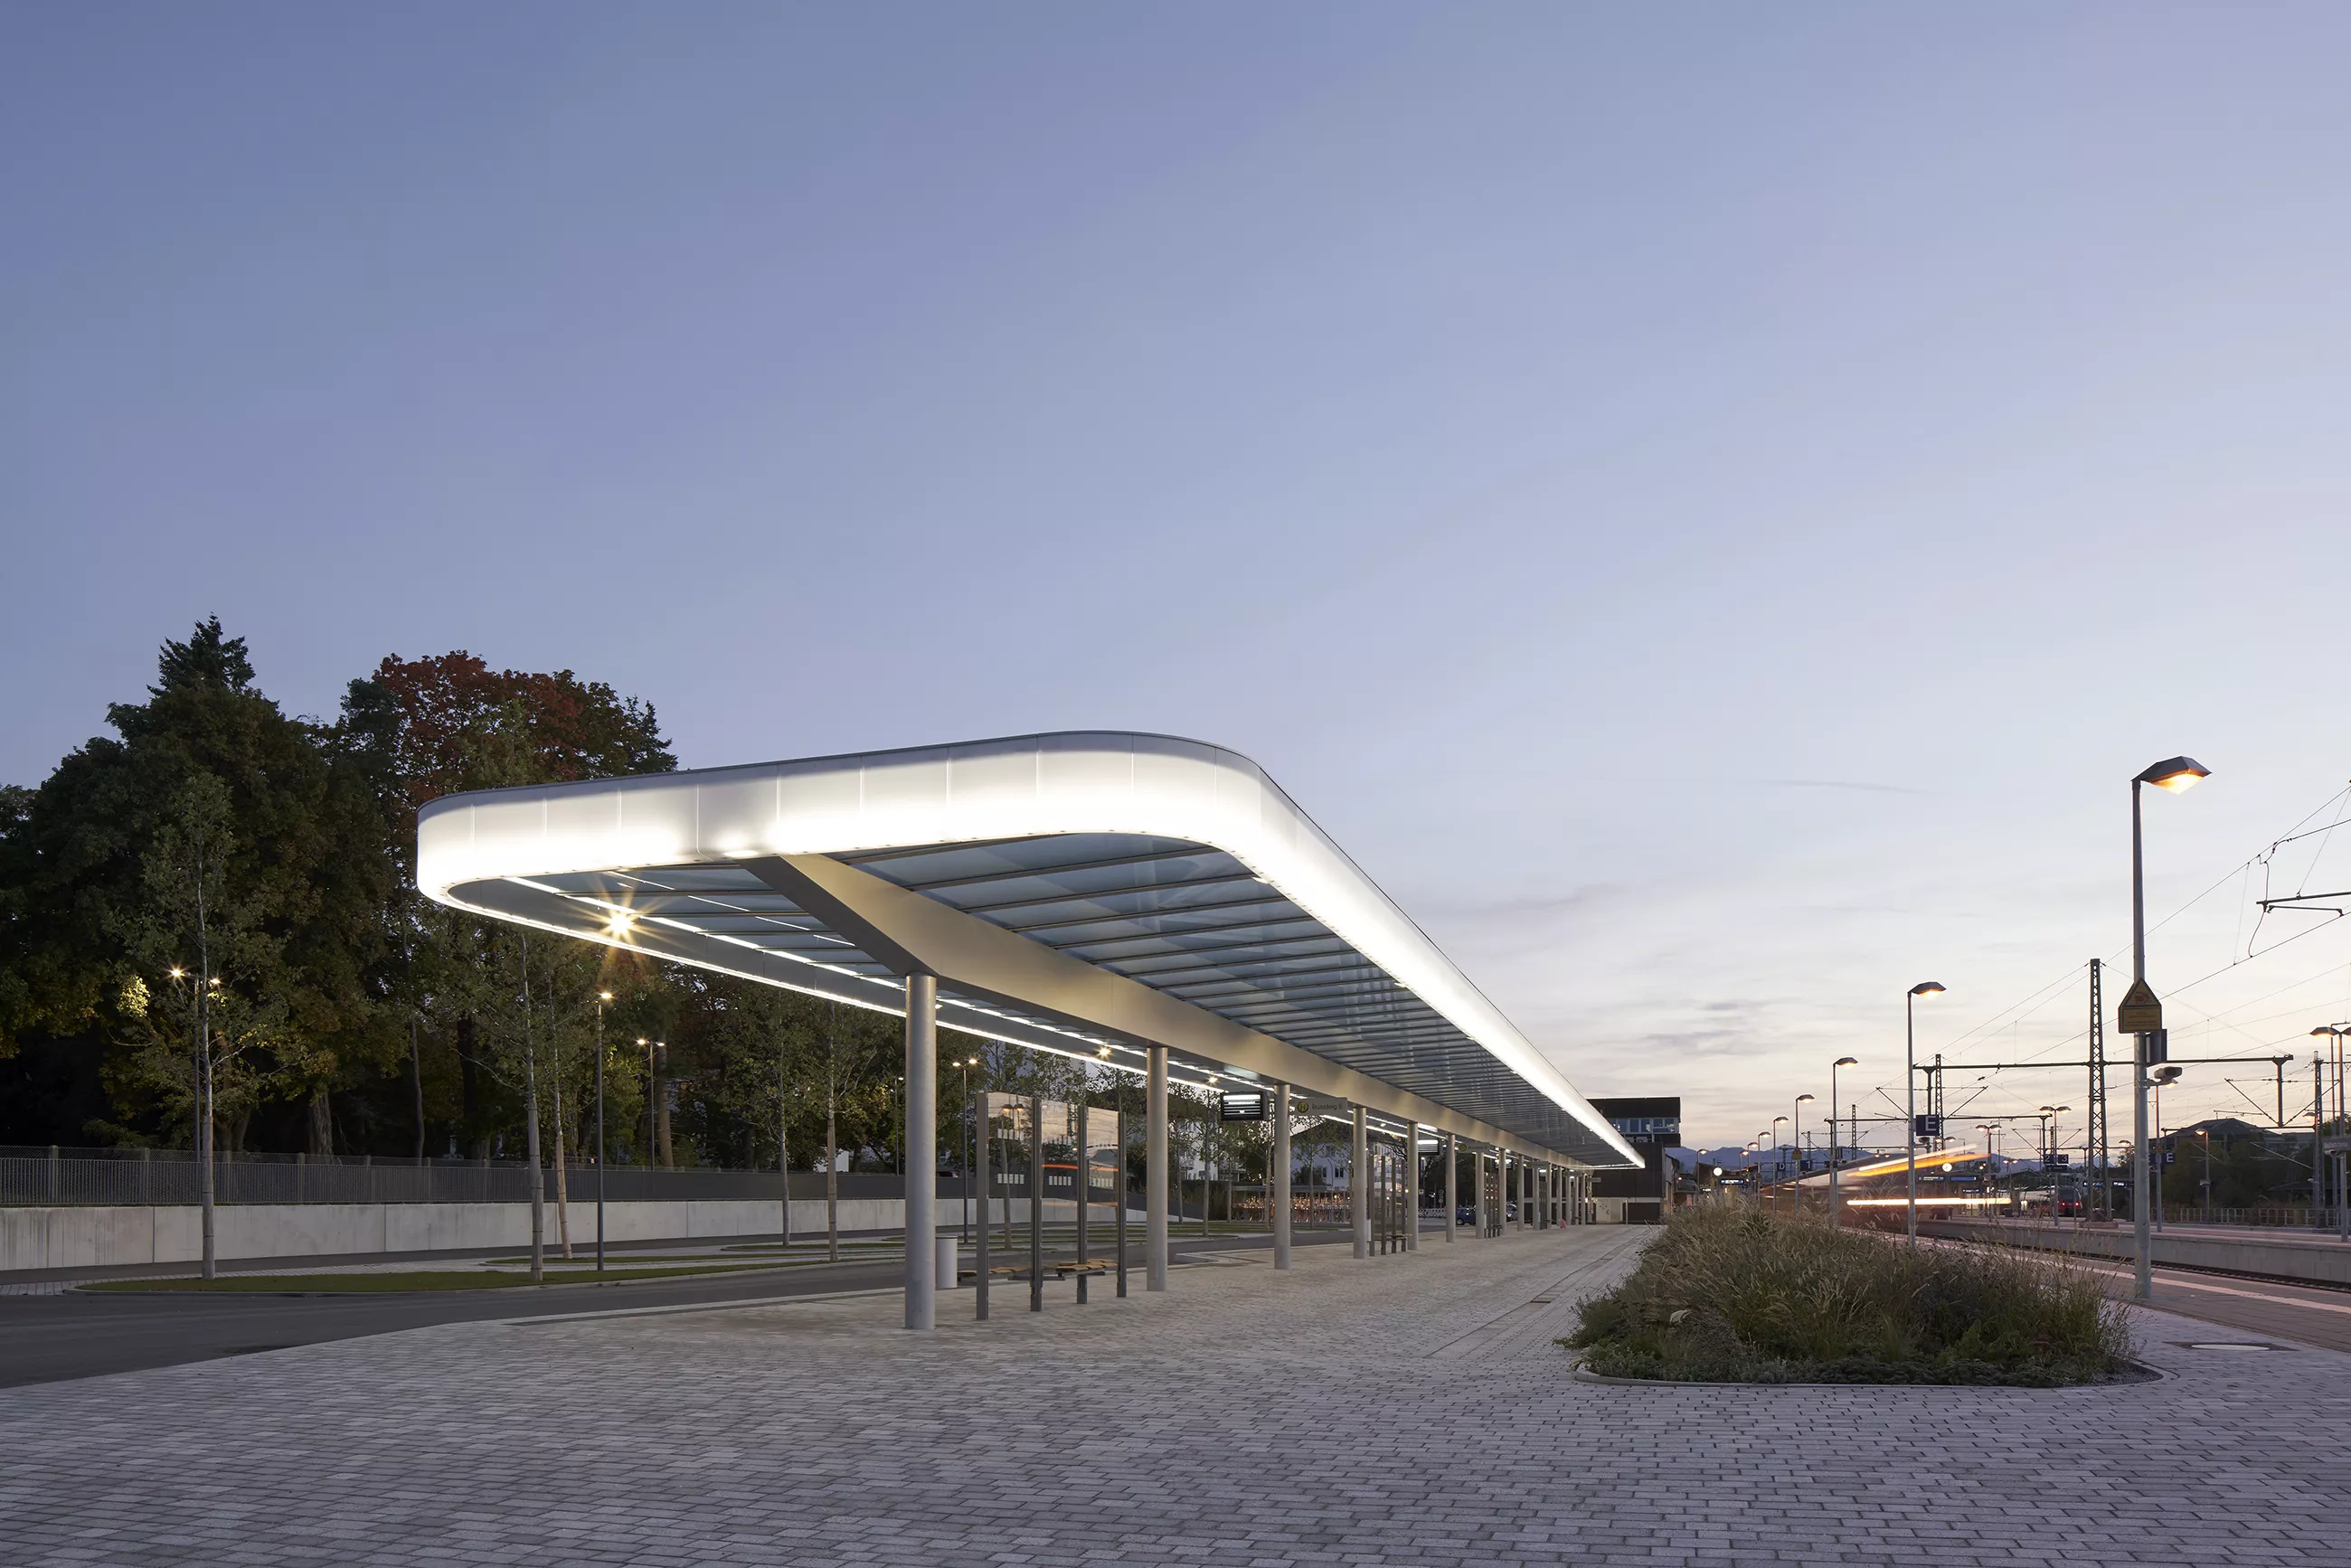 Translucent surround in HIMACS illuminates central bus station in Germany